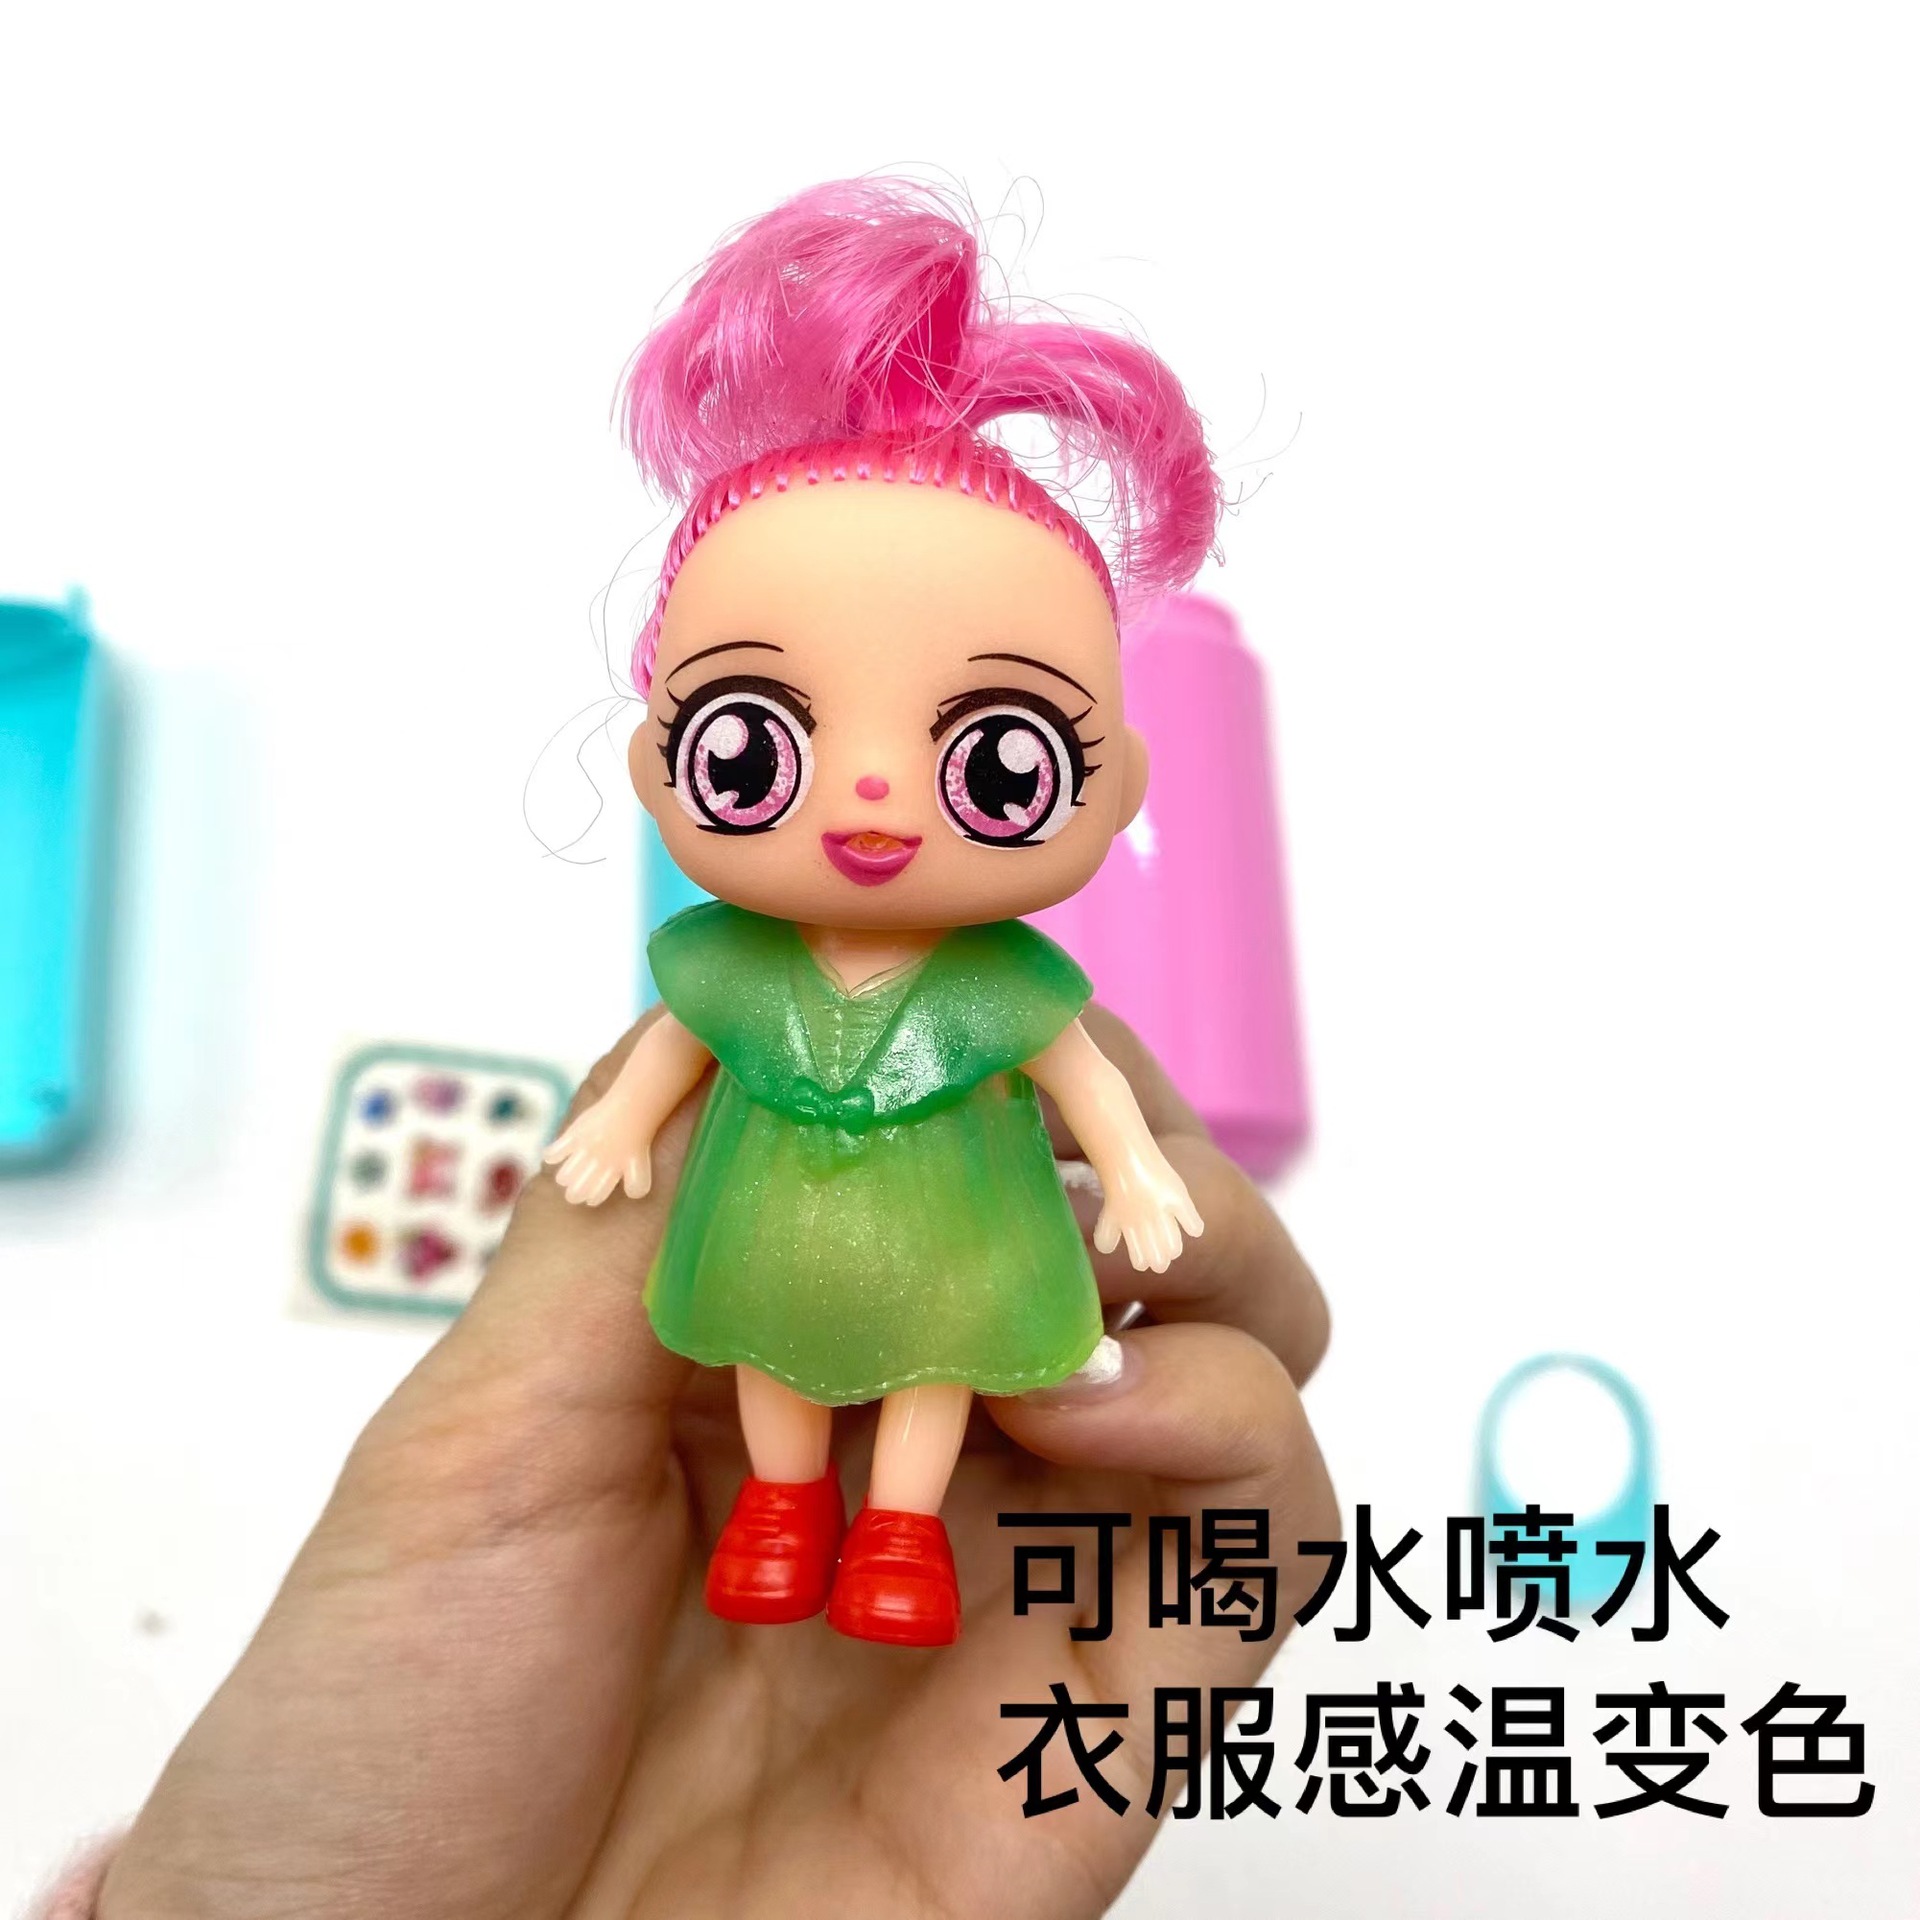 Children's Surprise Doll Blind Box Beverage Bottle Disassembly Music Cartoon Princess Mini Doll Play House Small Jewelry Toy